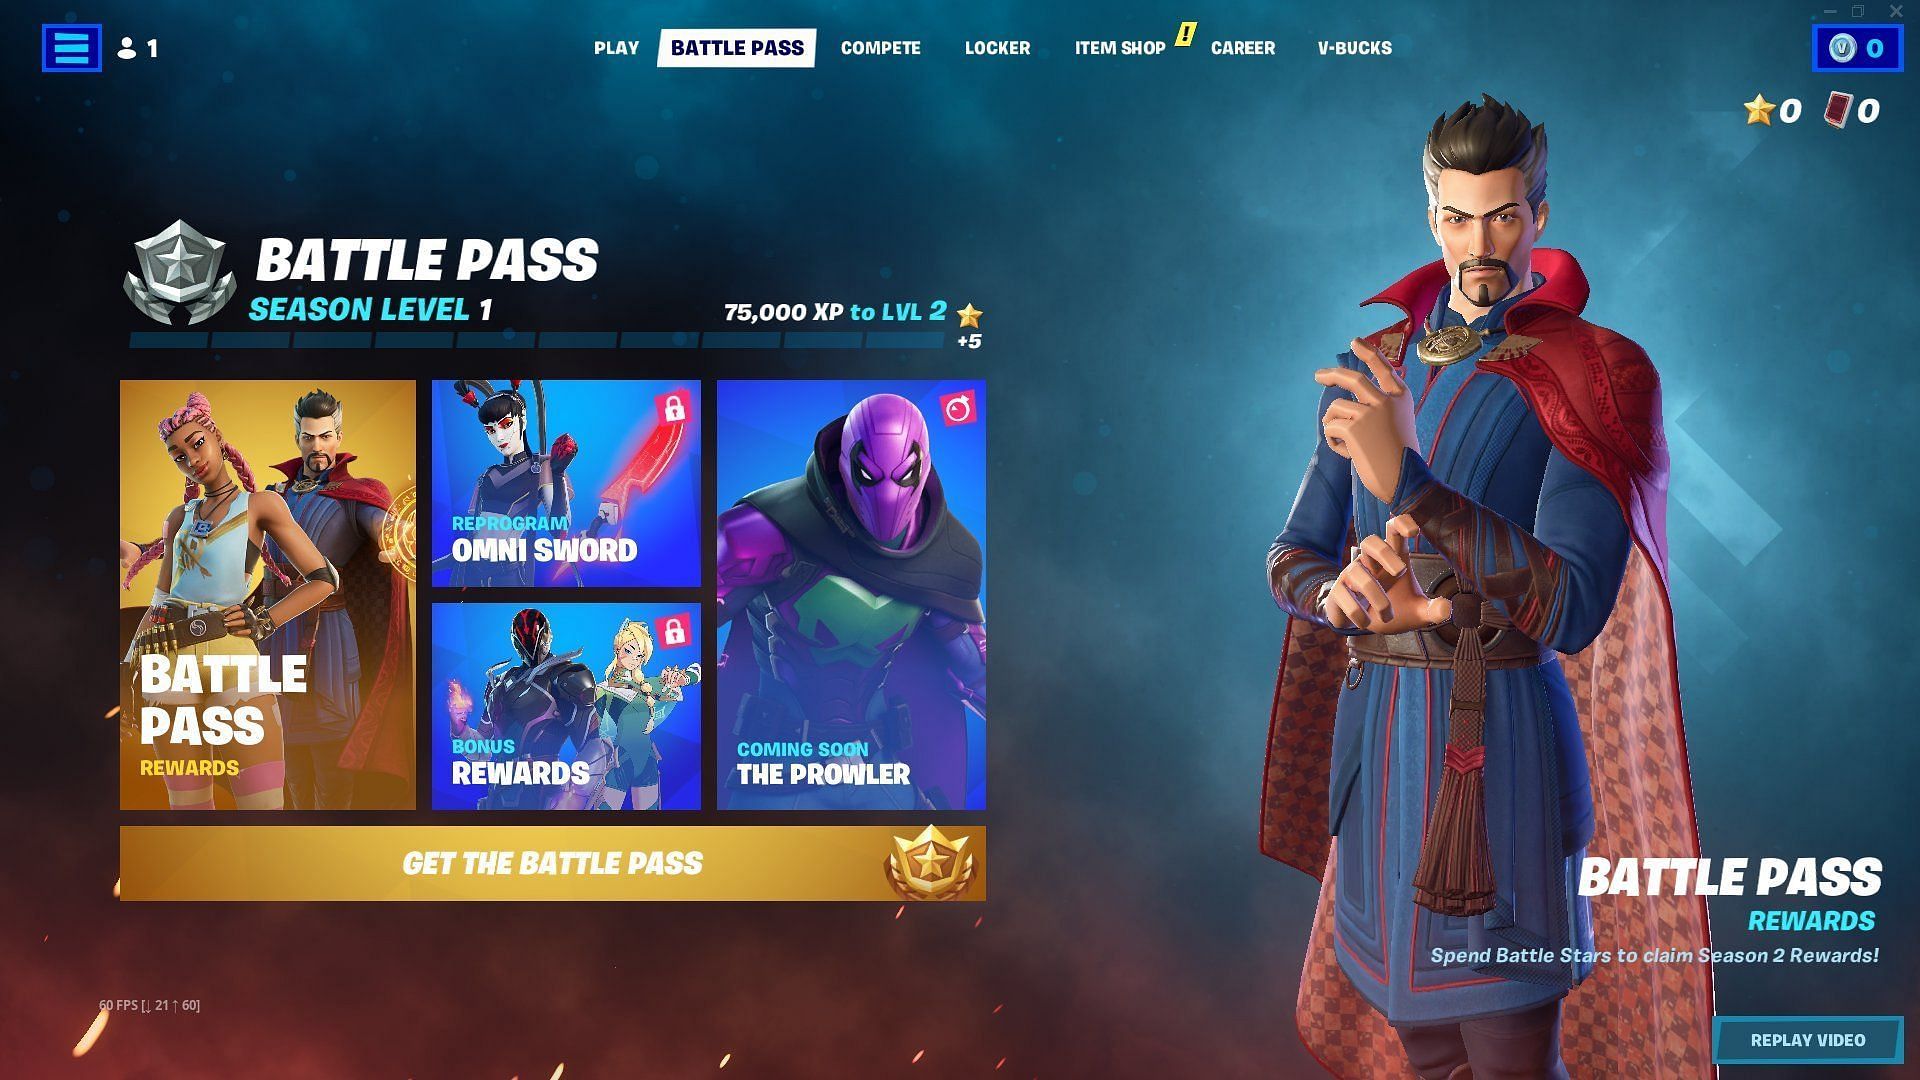 Fortnite Chapter 3 Season 2 Battle Pass skins from Page 1 to Page 10 (Image via Epic Games)